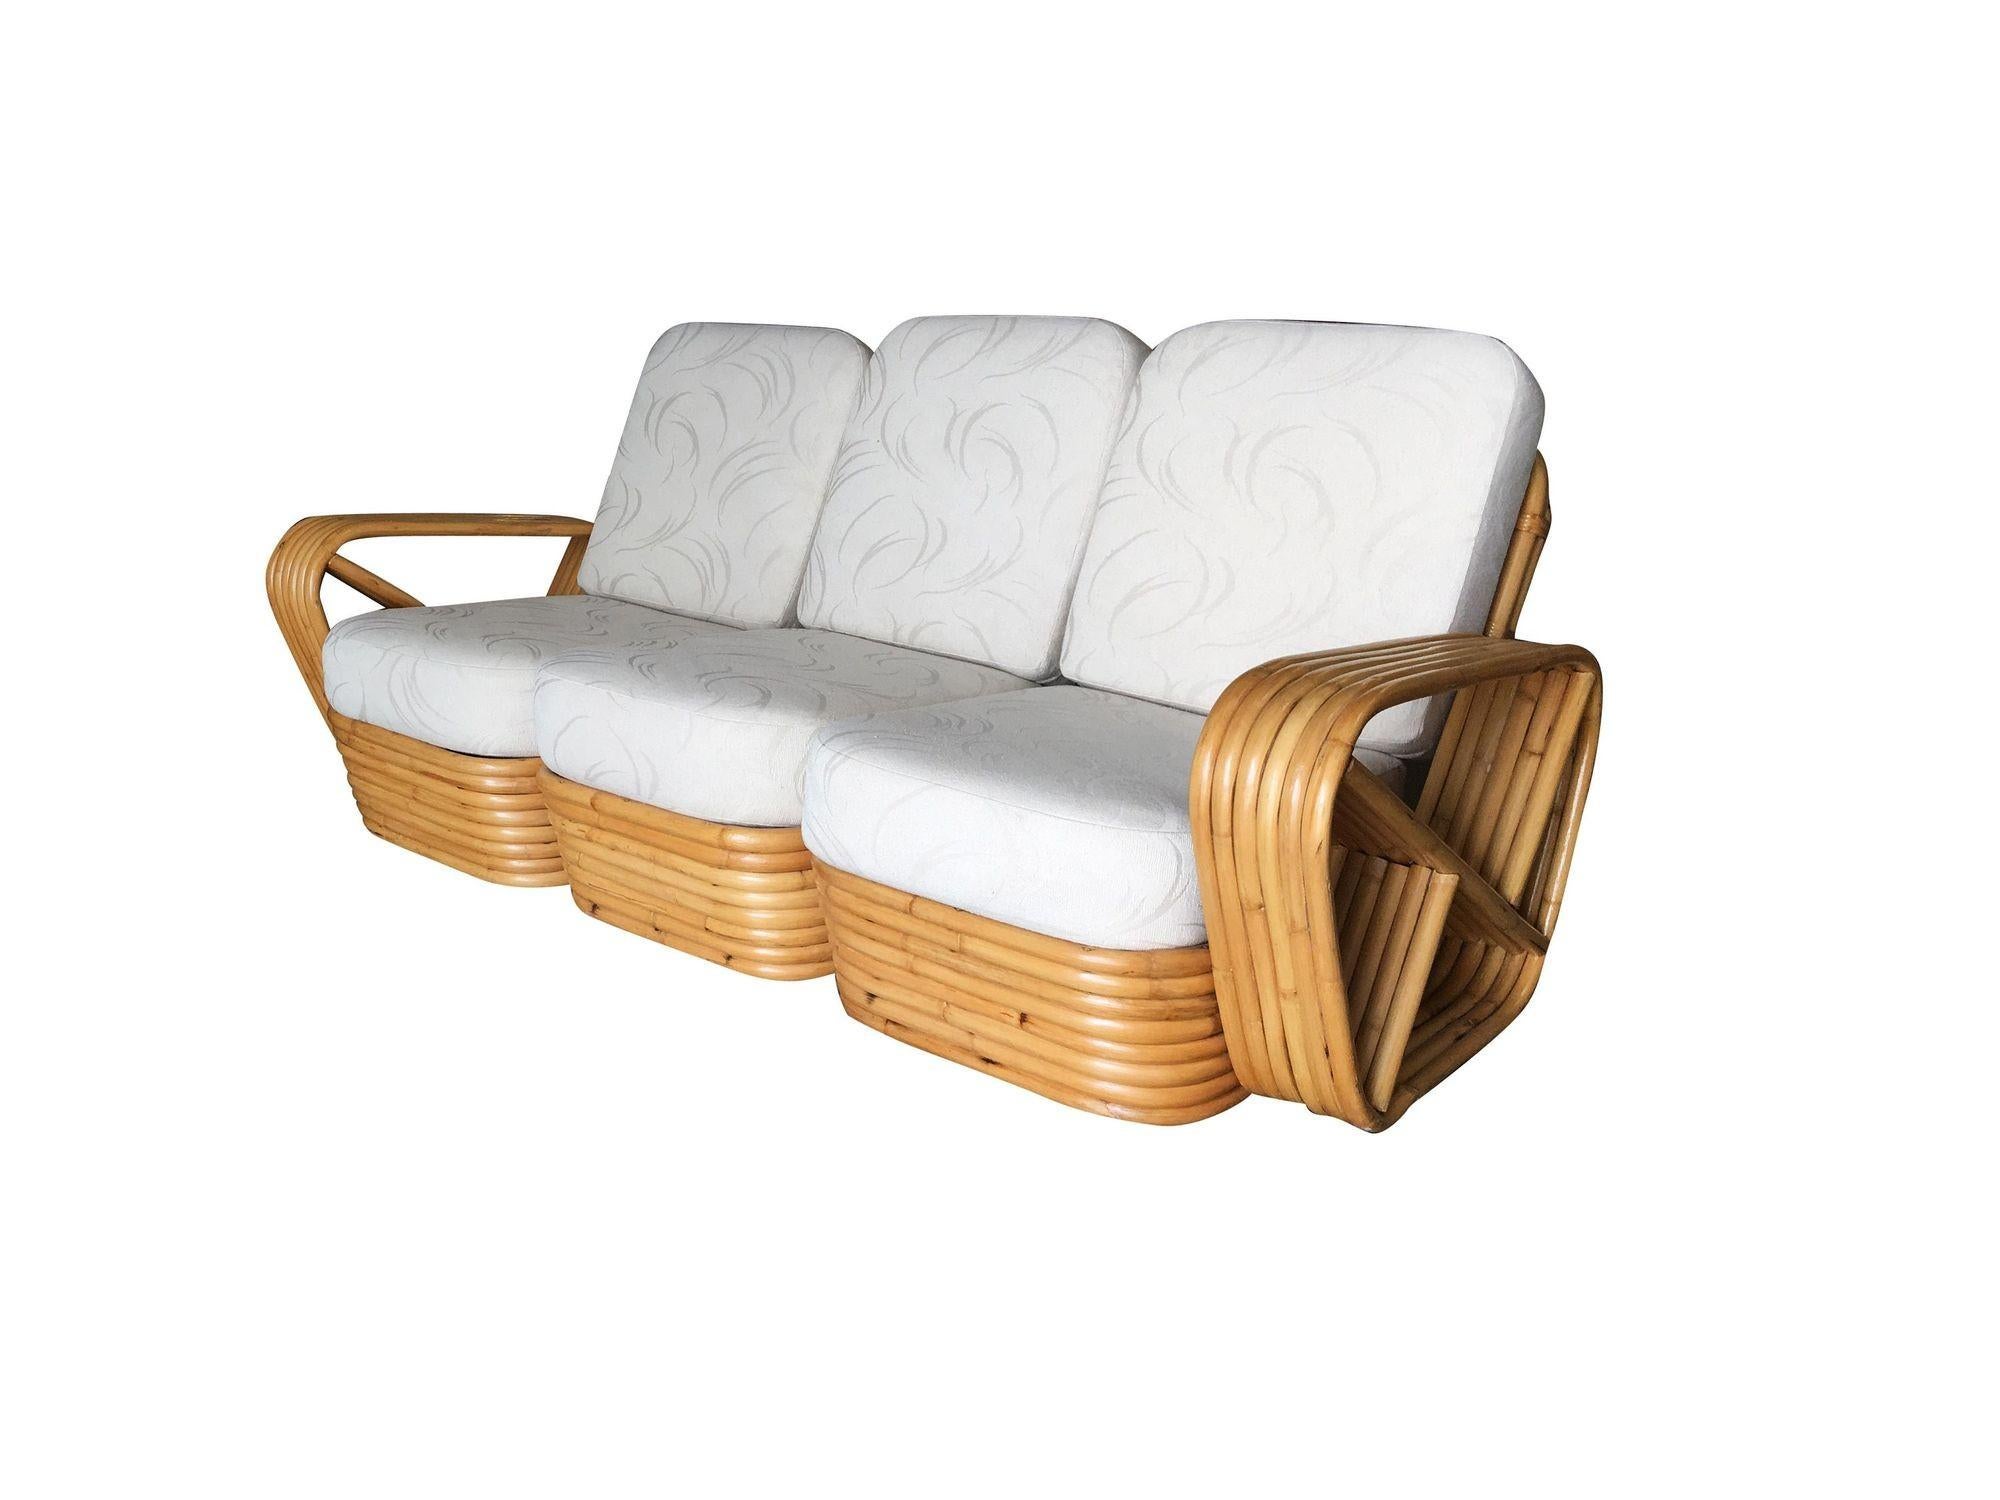 Six-strand square pretzel style, three-seat sectional sofa. This sofa features the famous five-strand square pretzel side arms and a stacked rattan base originally designed by Paul Frankl.
Measures:
Sofa: 34